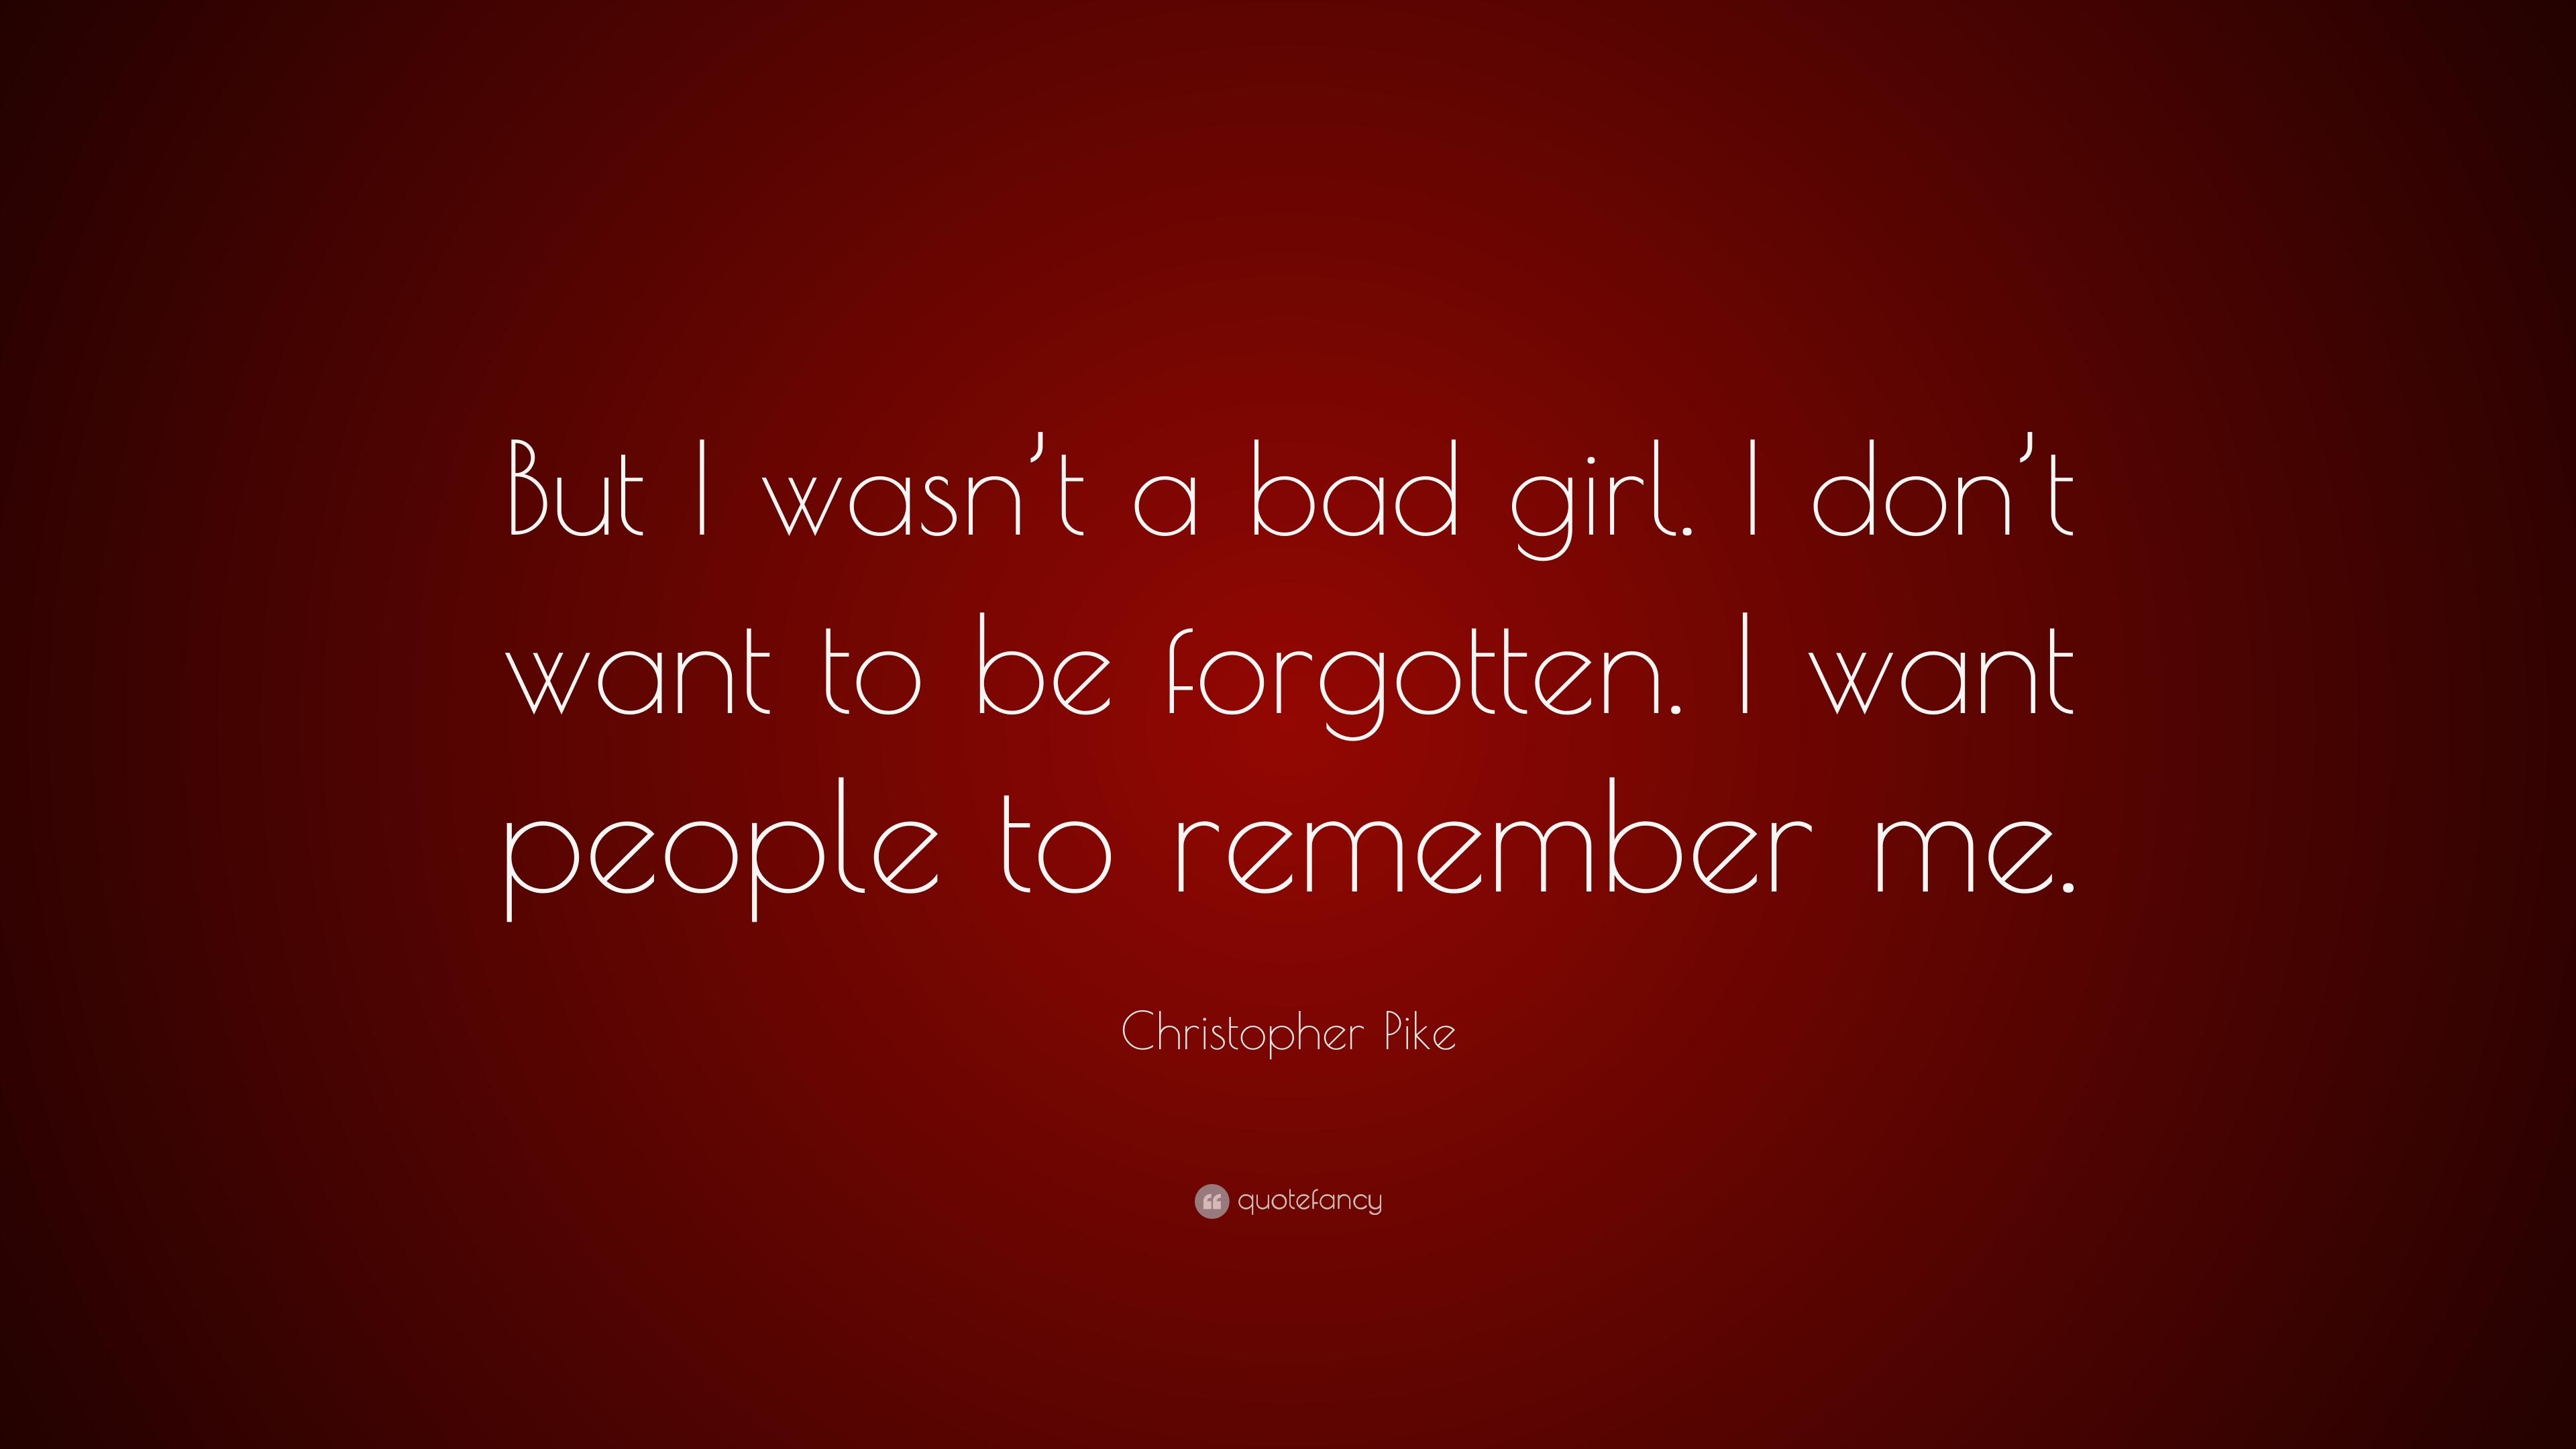 Christopher Pike Quote: “But I wasn't a bad girl. I don't want to be